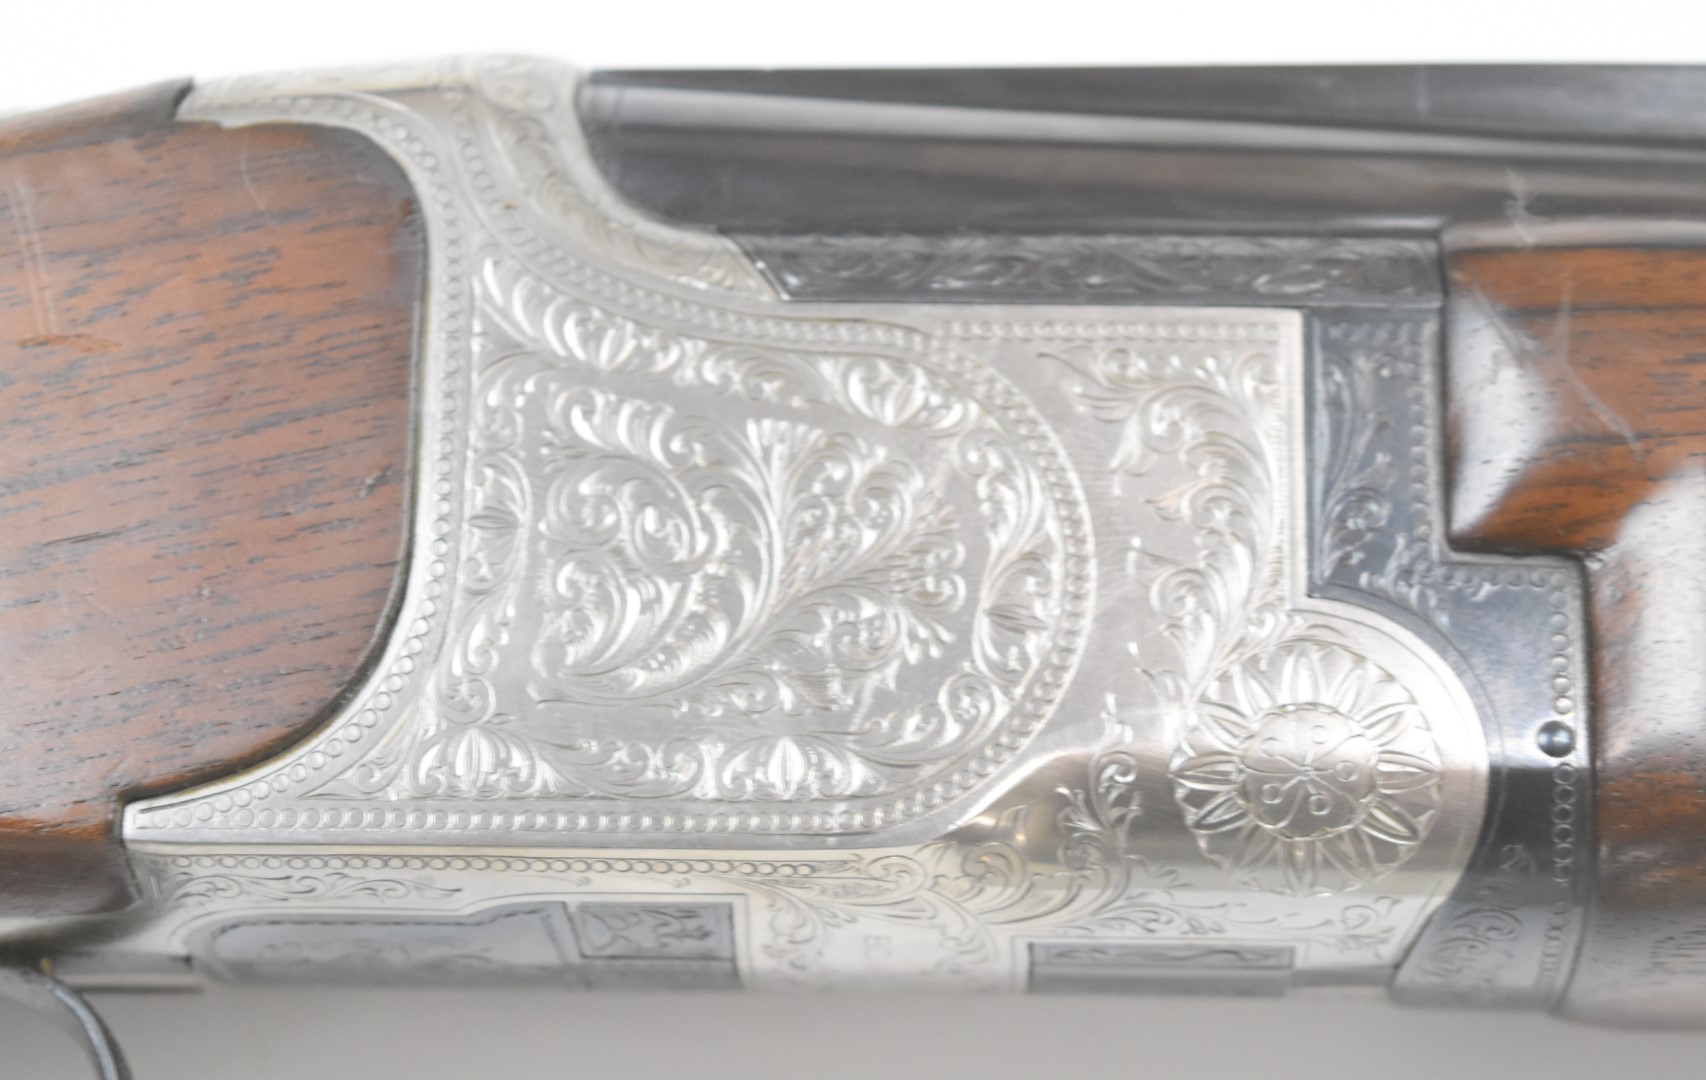 Miroku 12 bore over and under ejector shotgun with engraved locks, underside, trigger guard, top - Image 6 of 11